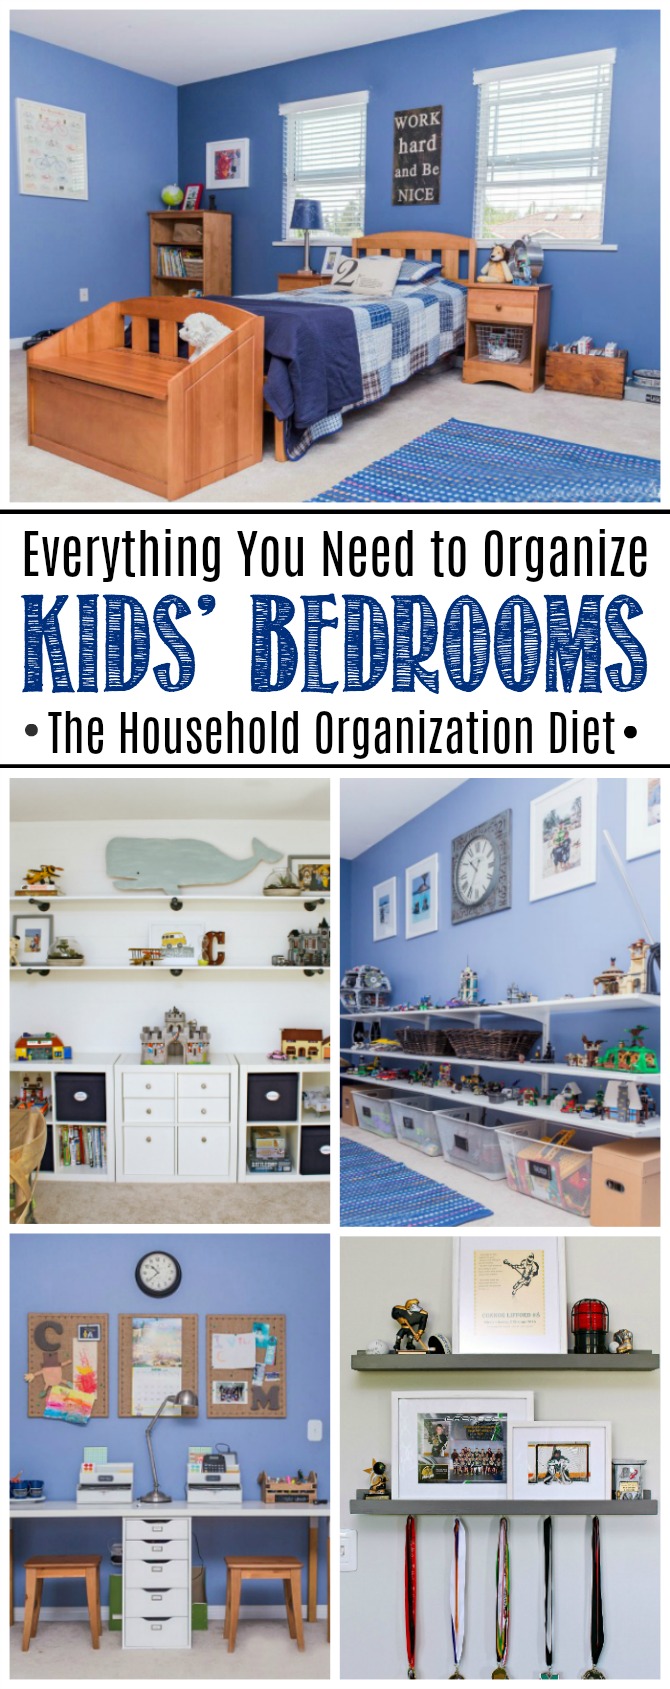 Kids' Bedroom Organization Ideas. Free printables and tips and tutorials to get your kids' bedrooms cleaned and organized for good. Free printables included as part of The Home Organization Diet.